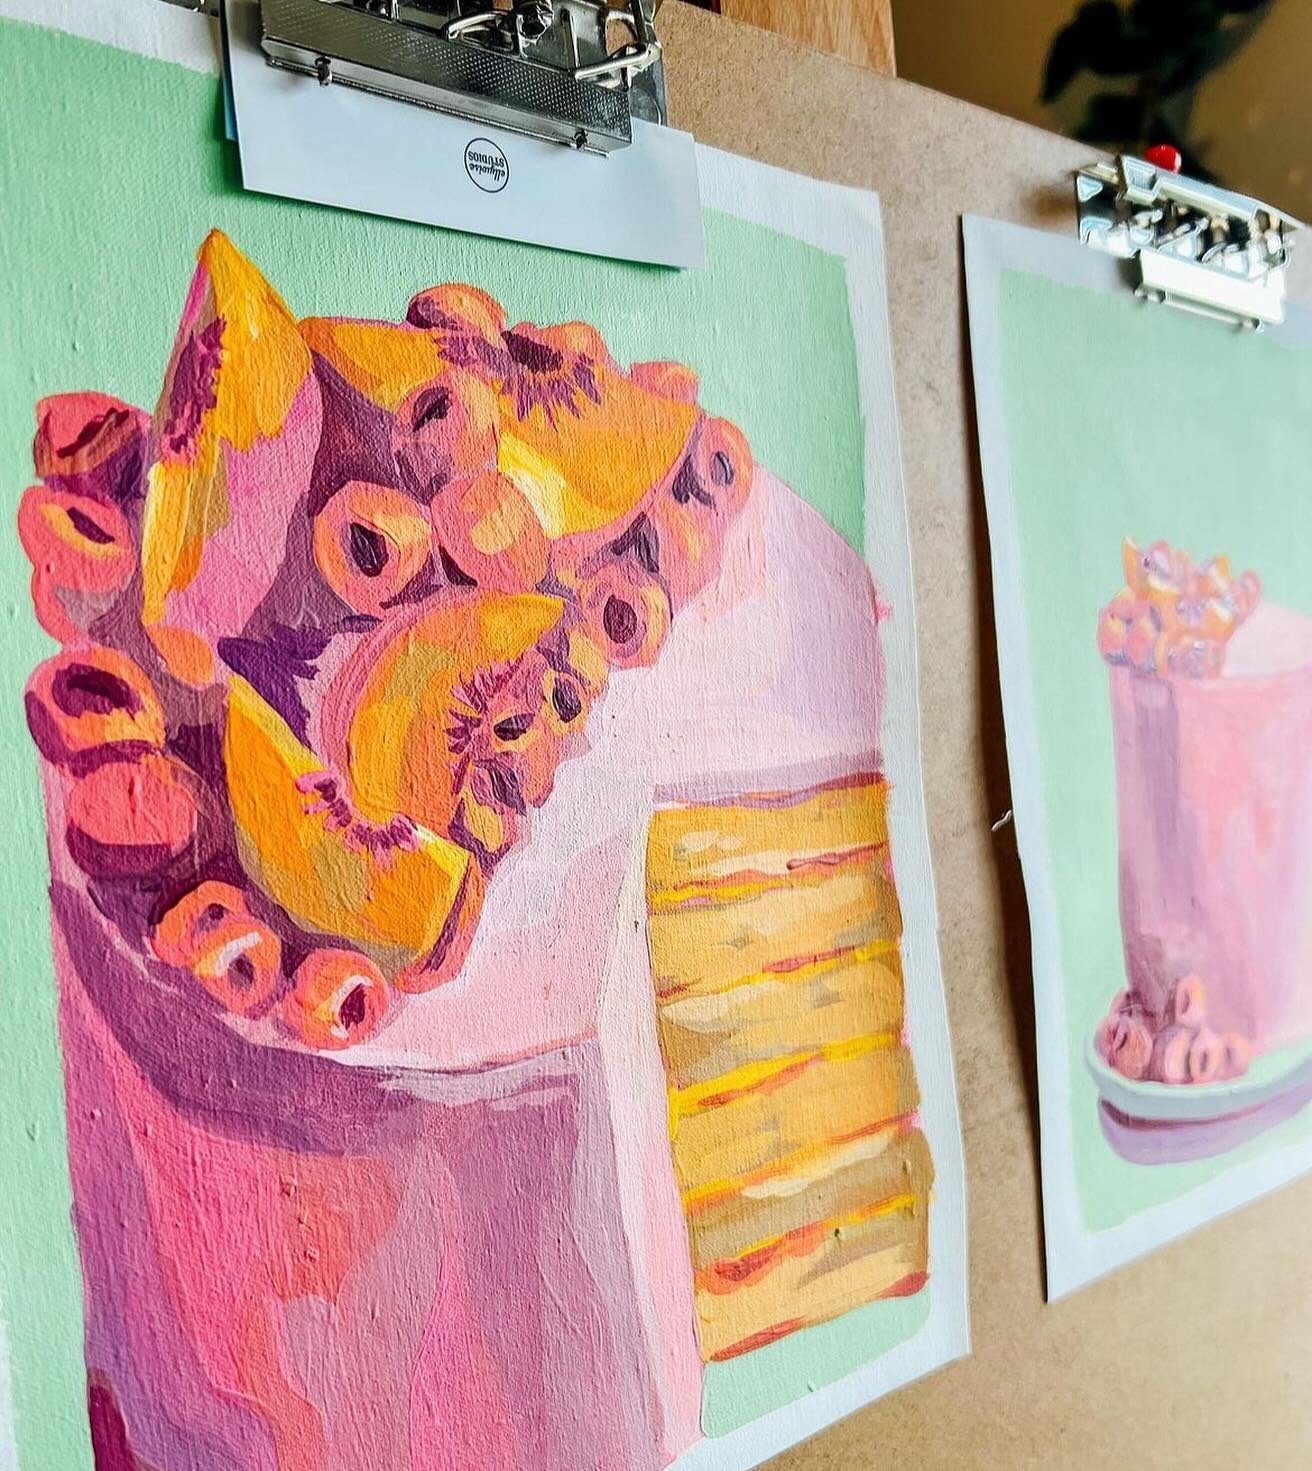 Cake for breakfast 🍰 now all the cake originals (and prints) are in the shop!!
&bull;
#ellywisestudios&nbsp;#creativehappylife #colorfulpaint #acrylic #acrylics #illustration #vibrant #painter #painting #momdesigner